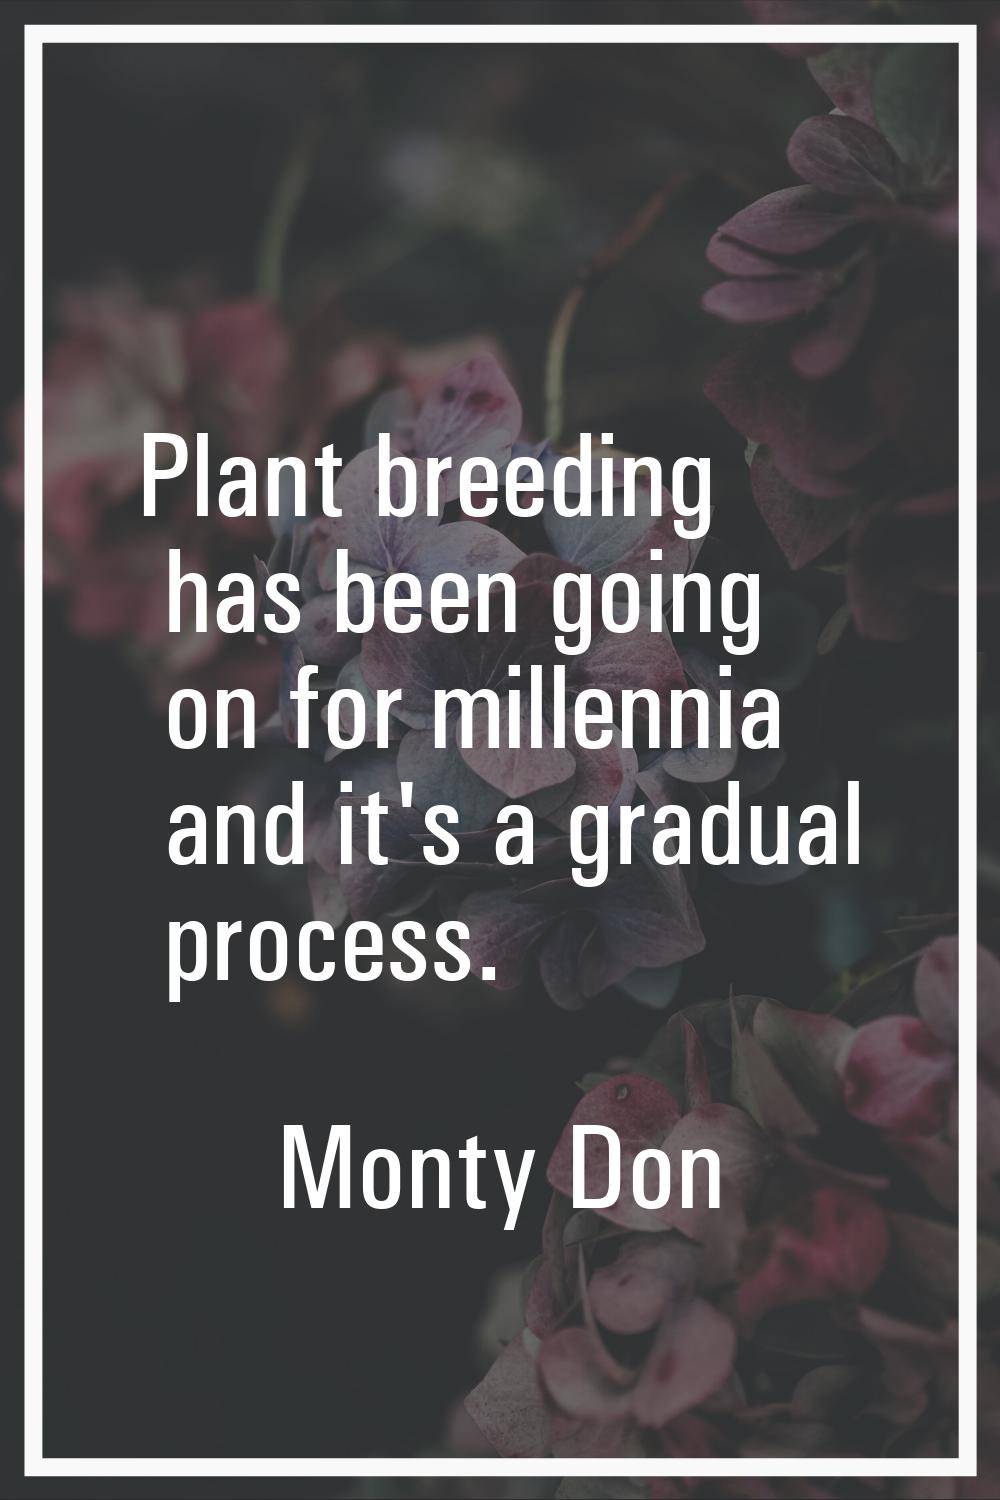 Plant breeding has been going on for millennia and it's a gradual process.